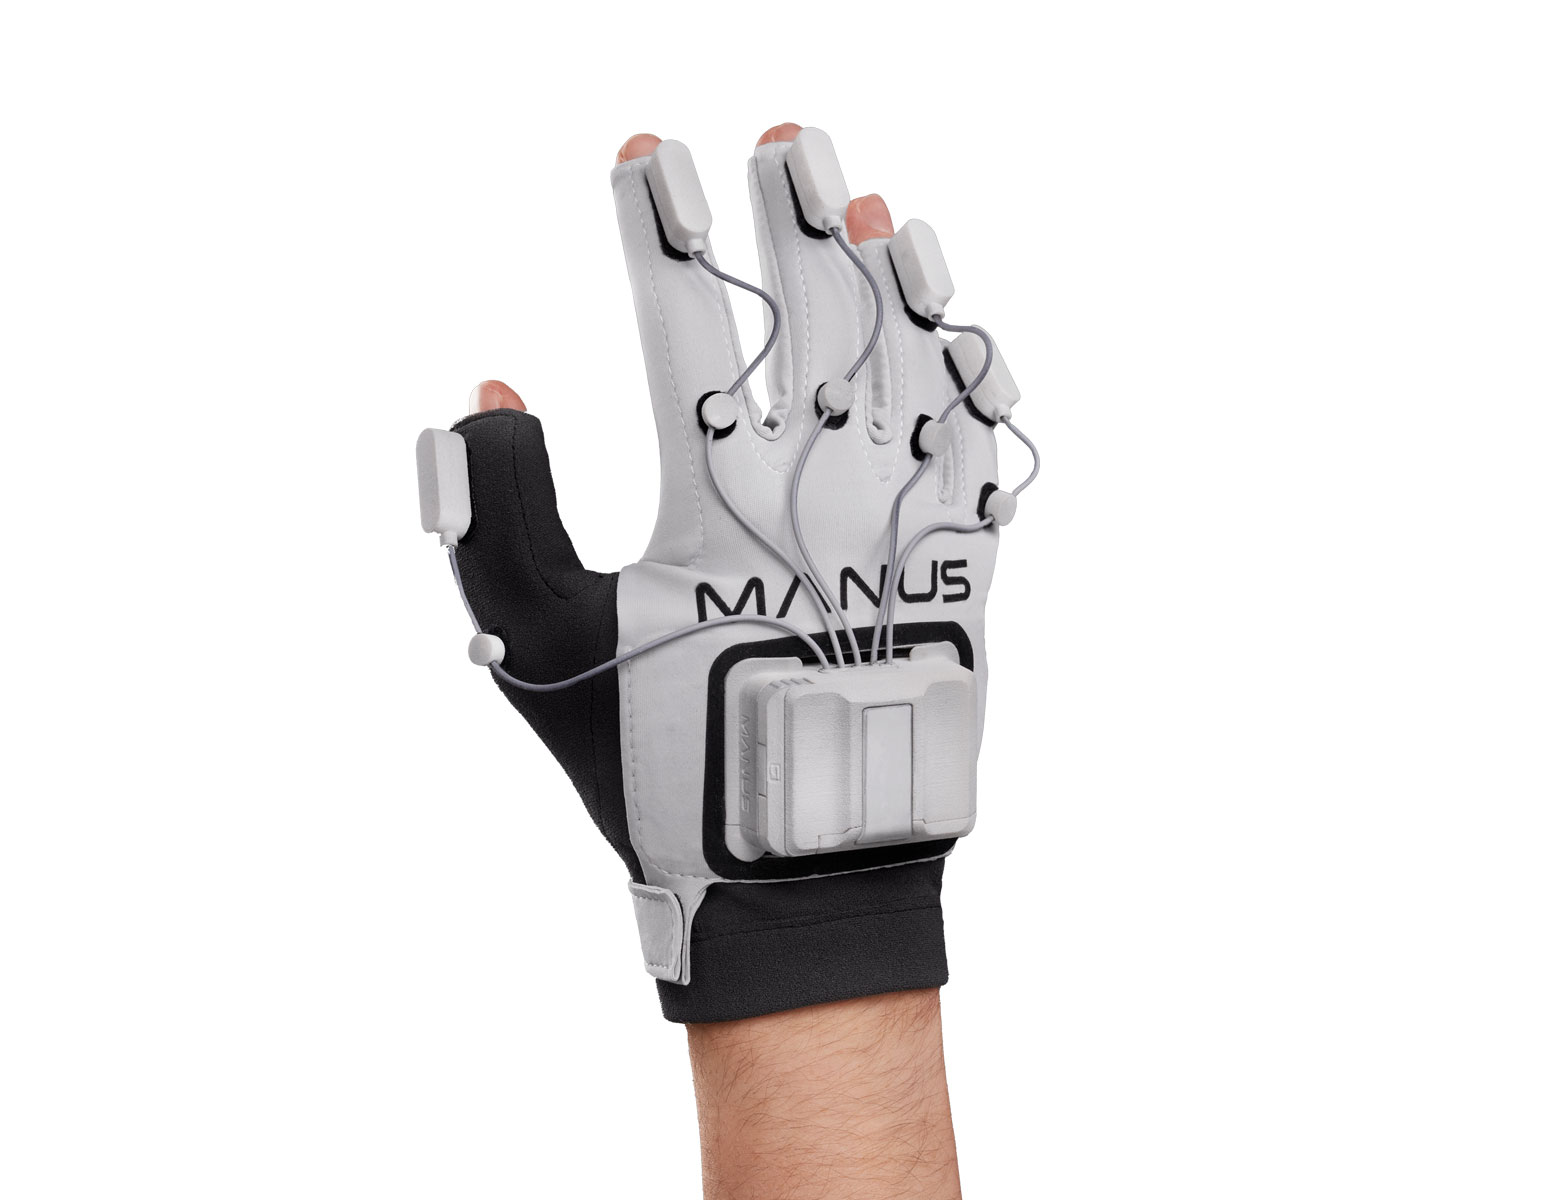 Haptic Gloves for Virtual Reality